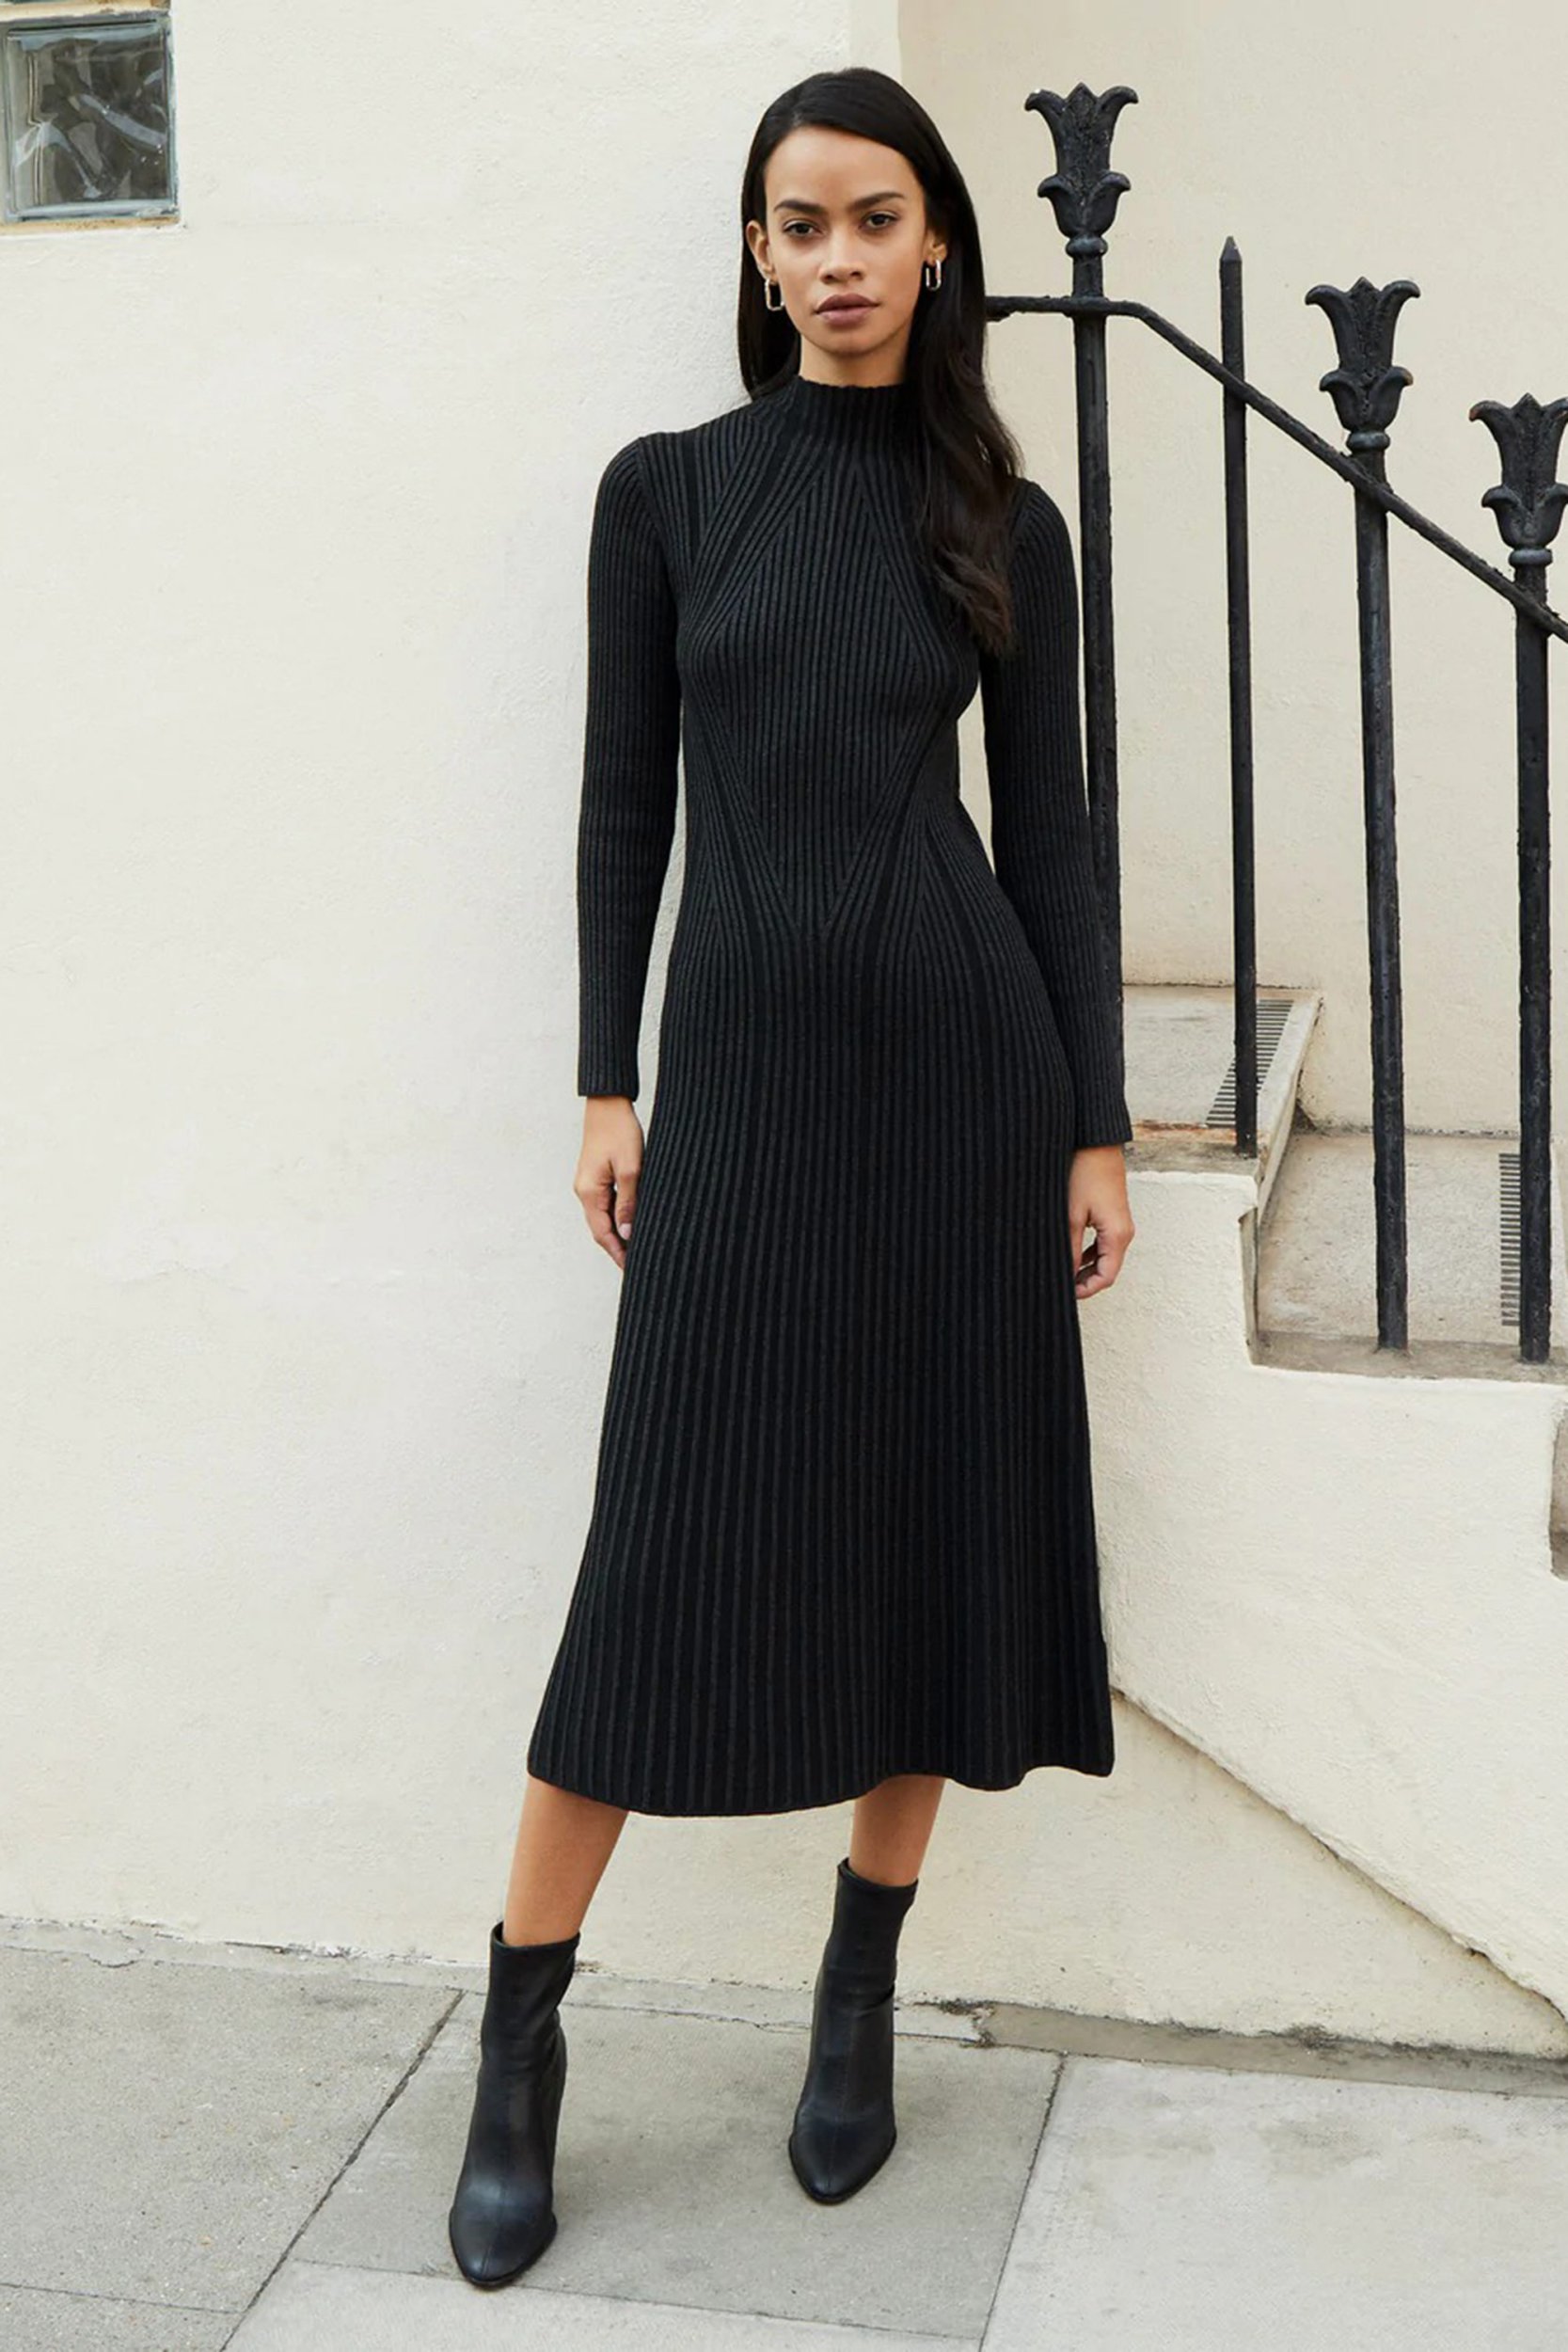 Winter Dresses: 27 Of The Best Under £99 For Every Occasion